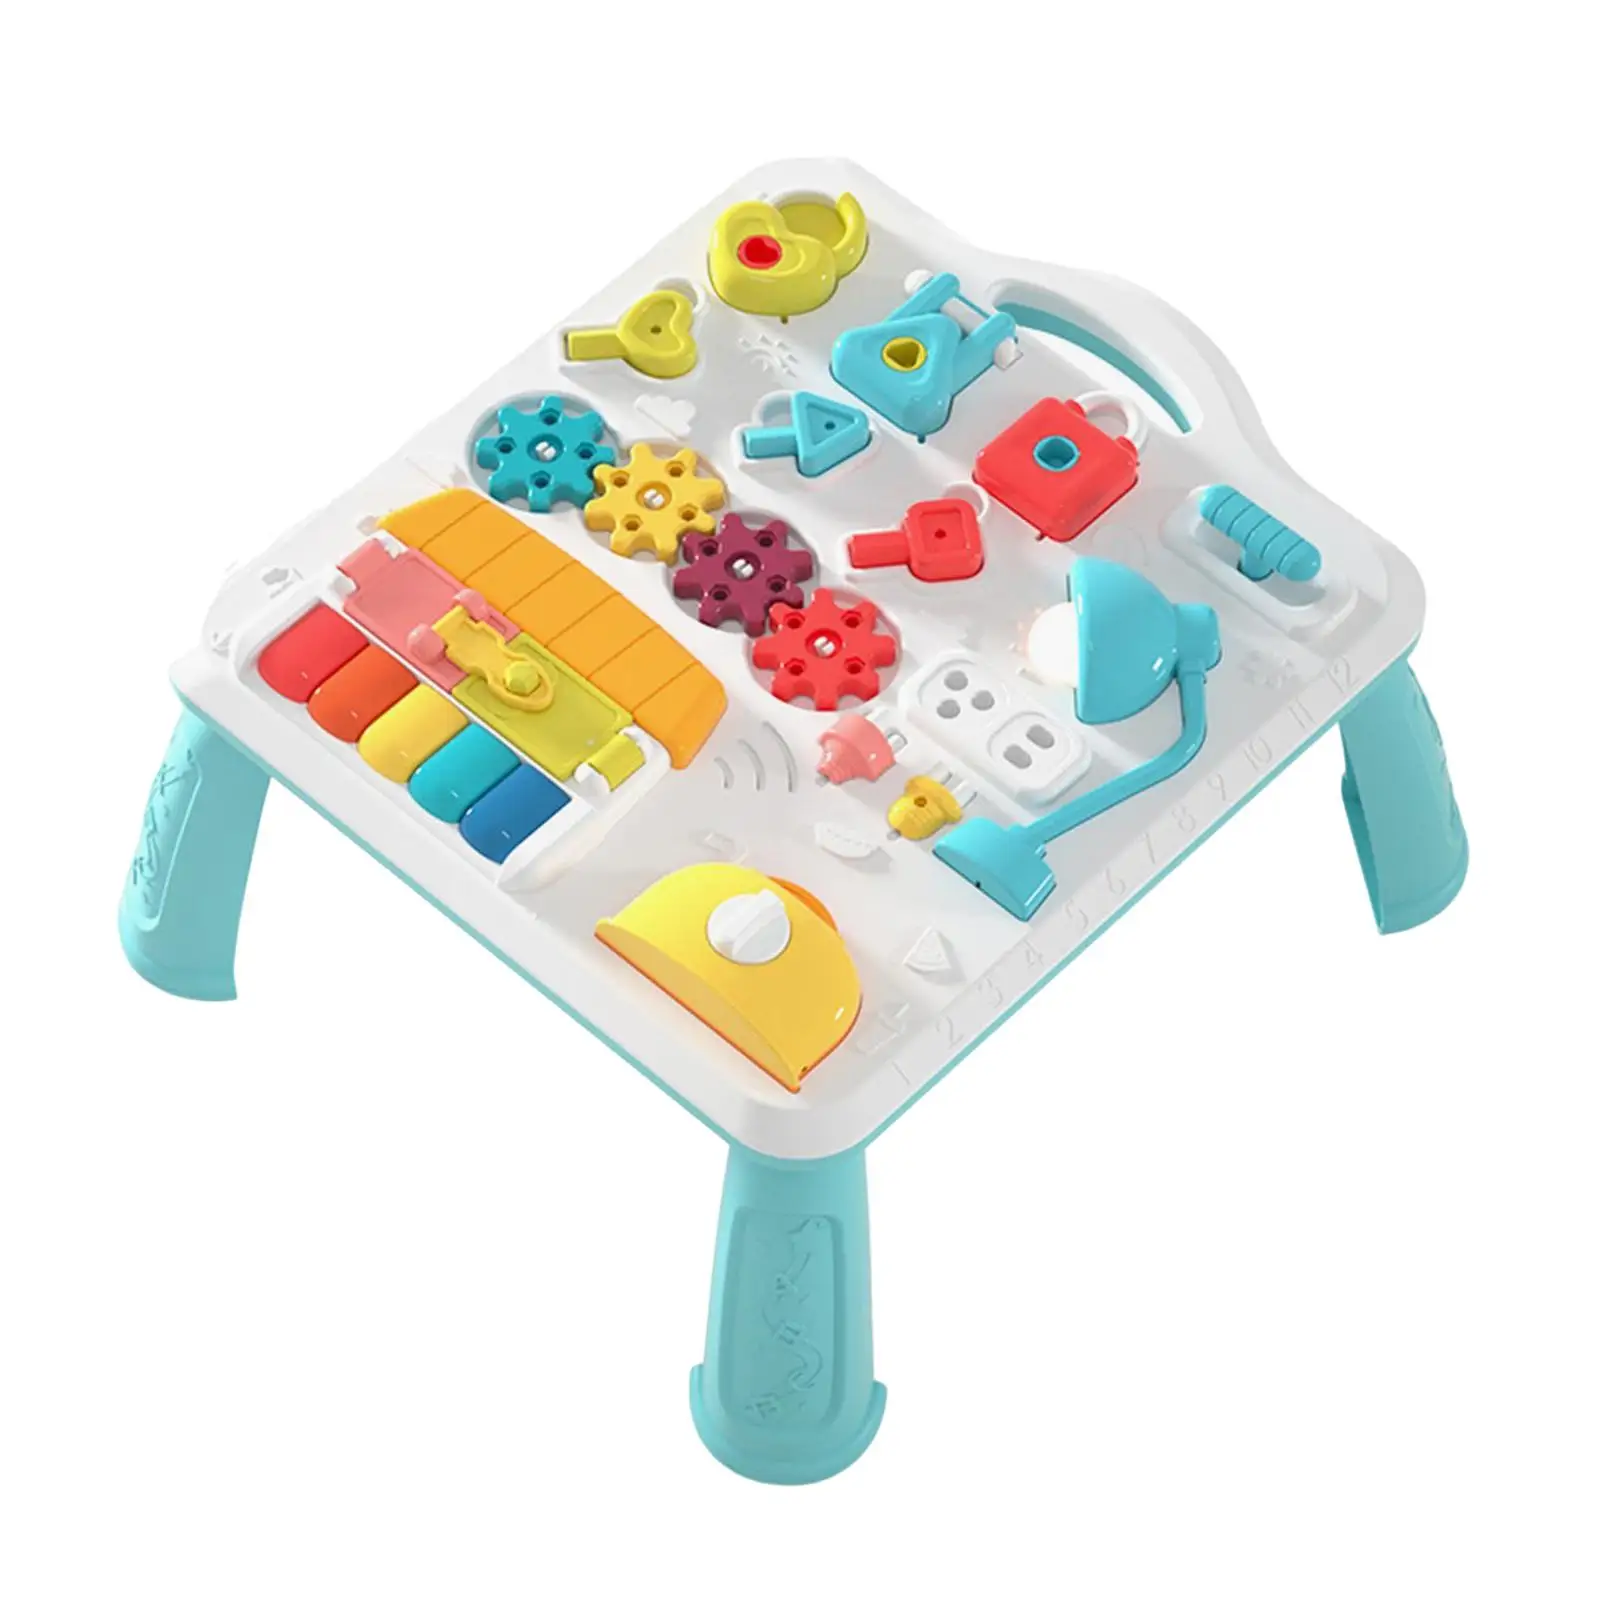 Multifunctional Activity Table Educational Toy with Leg Support Colorful Teaching Aids Detachable Busy Table for Gift Child Boys